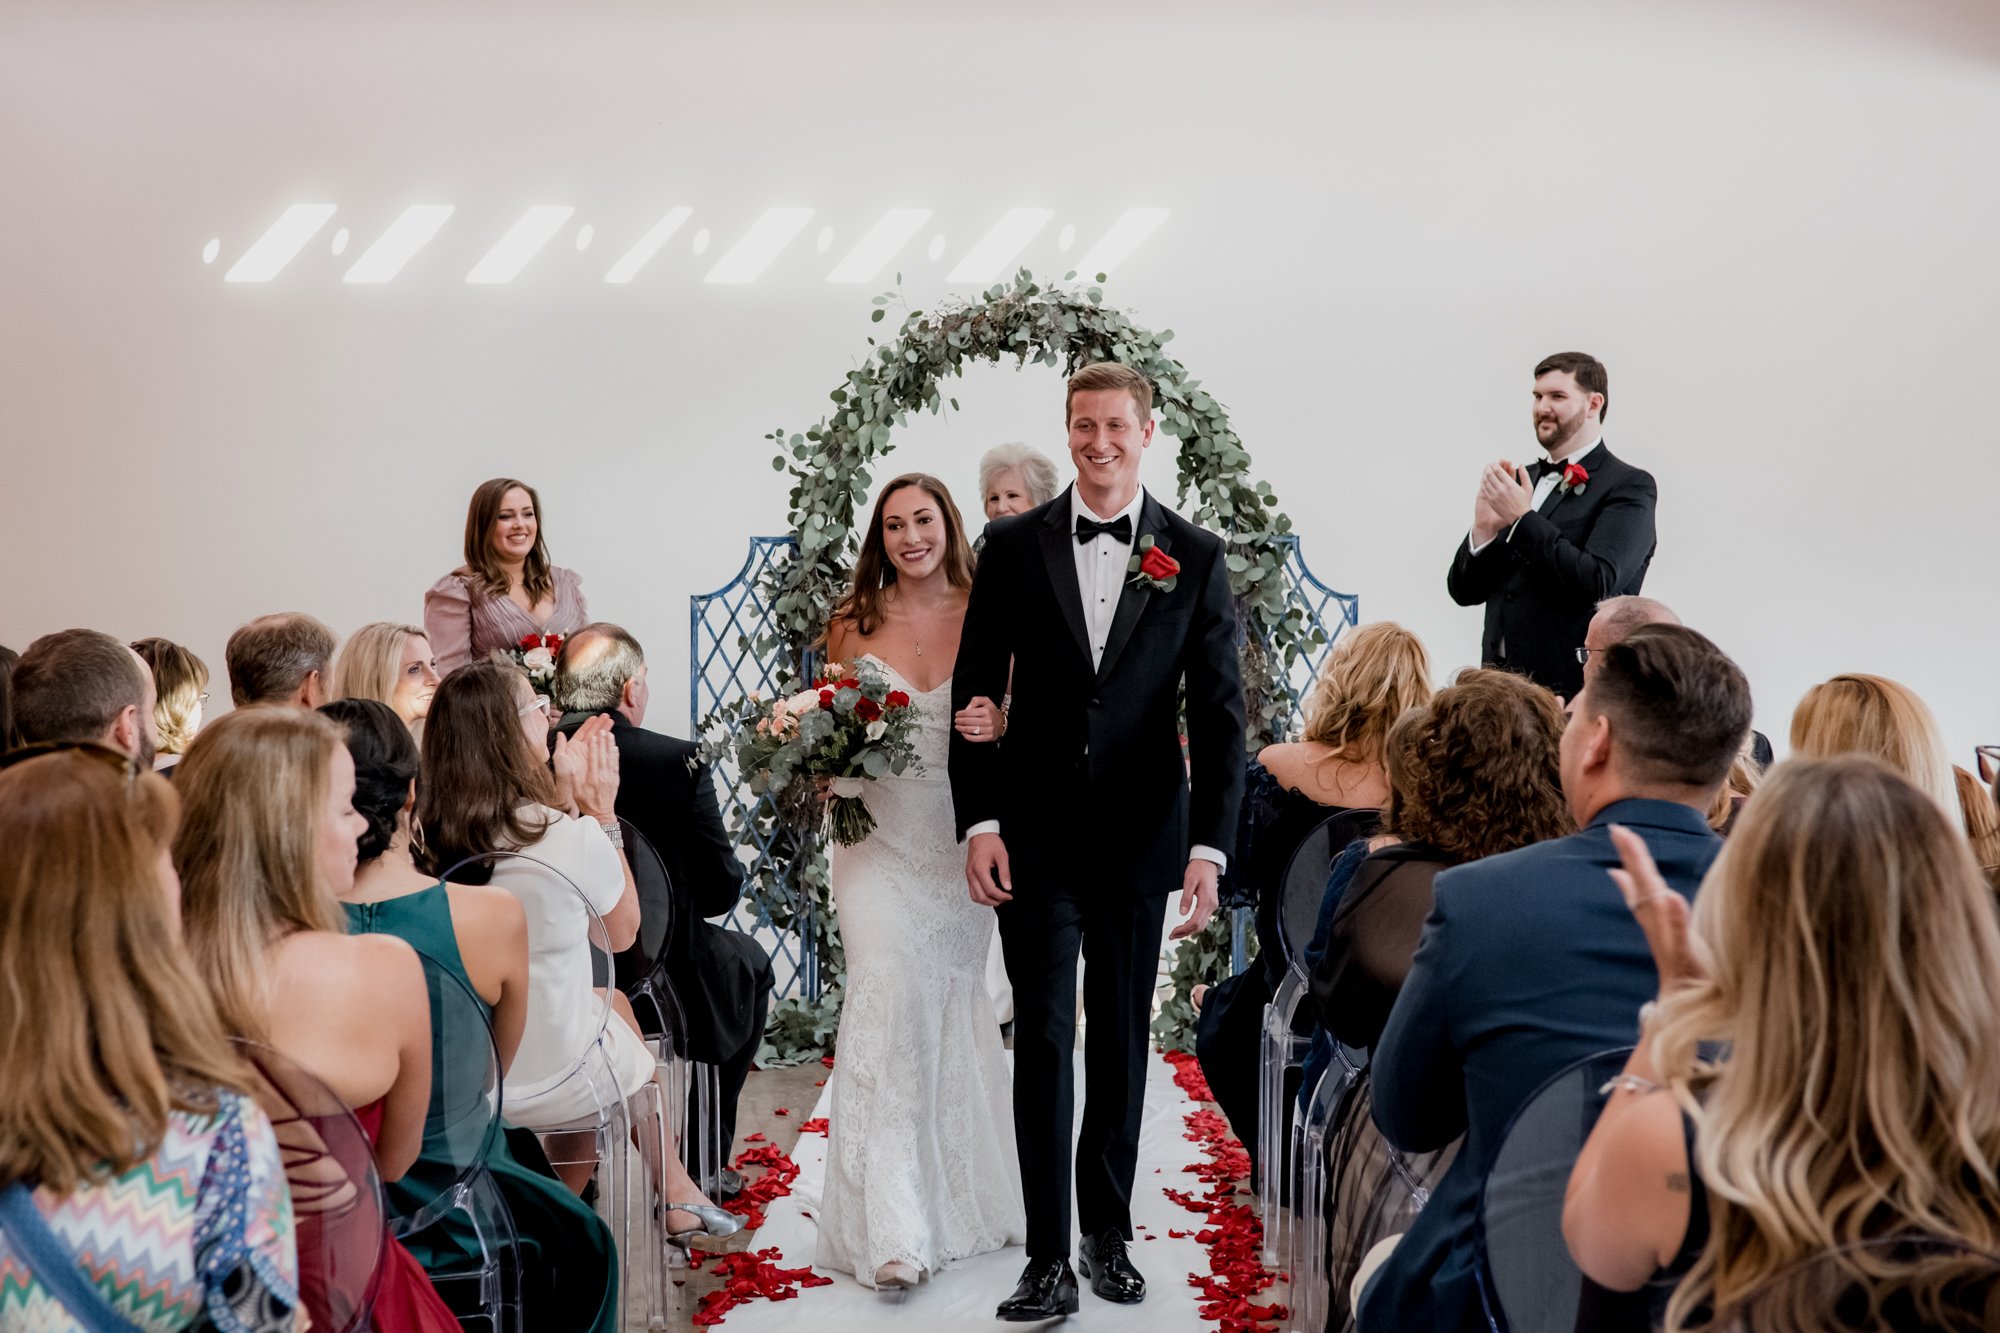 Bride and groom walking down the aisle - Wedding ceremony at Ronin Harrisburg